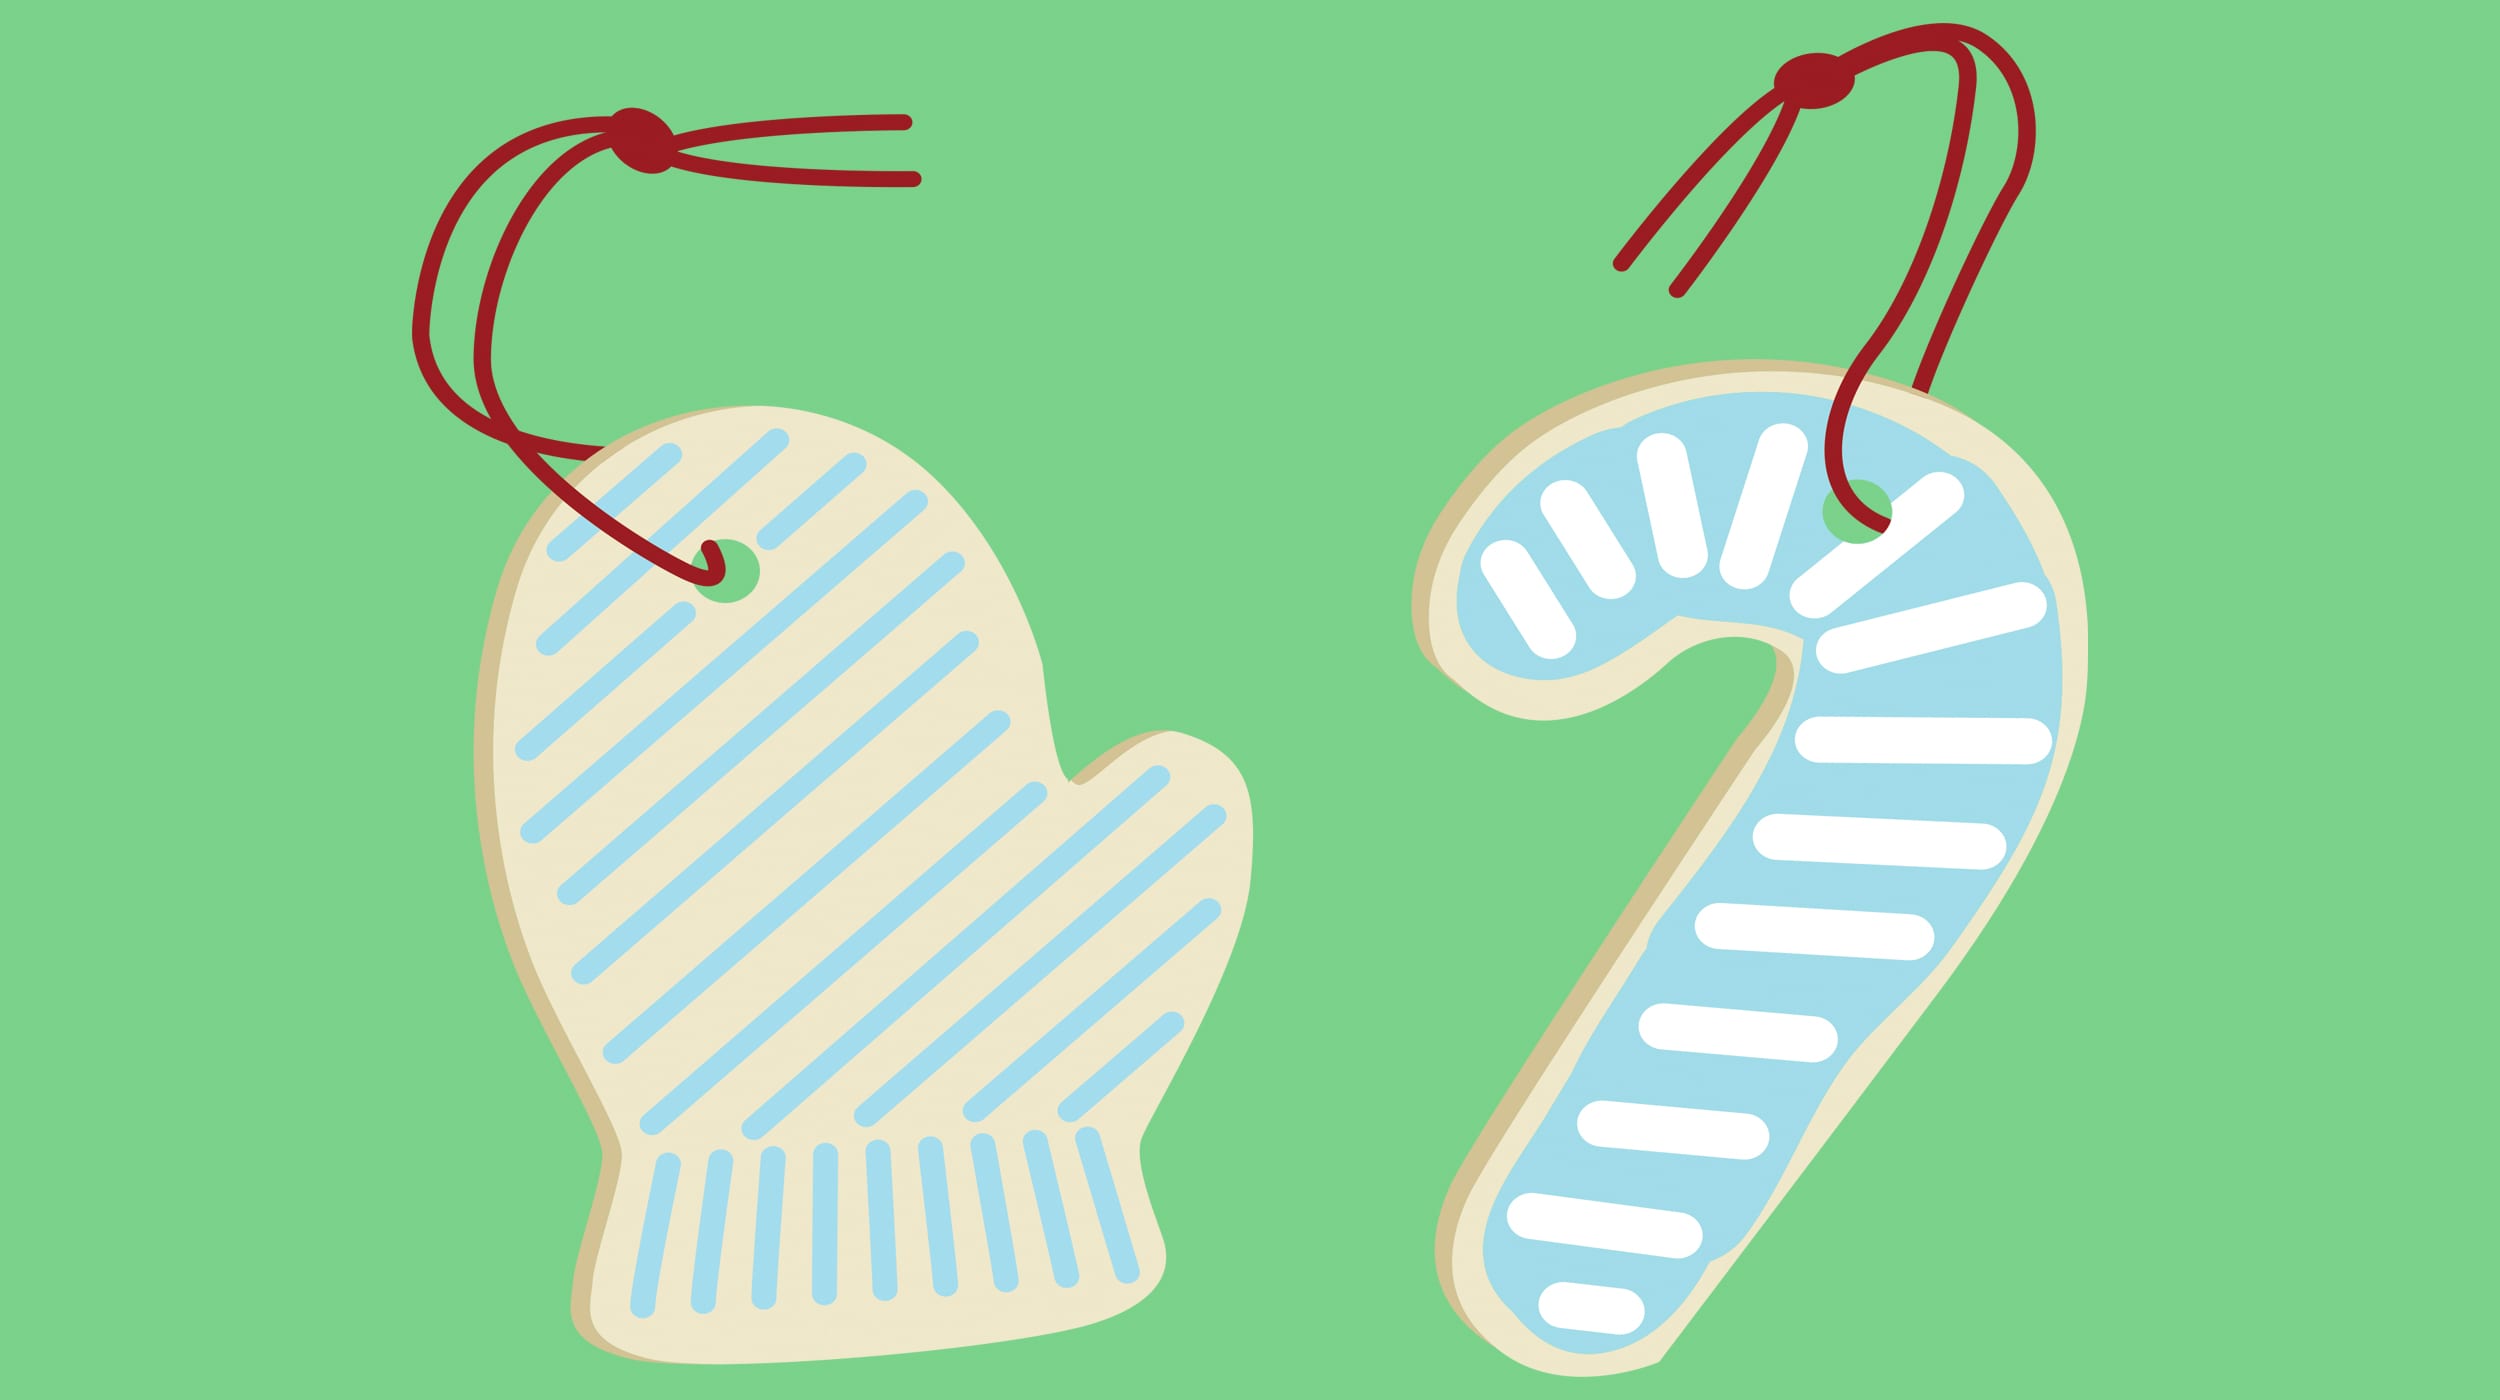 Easy holiday decorations illustration of salt-dough mitten and candy cane